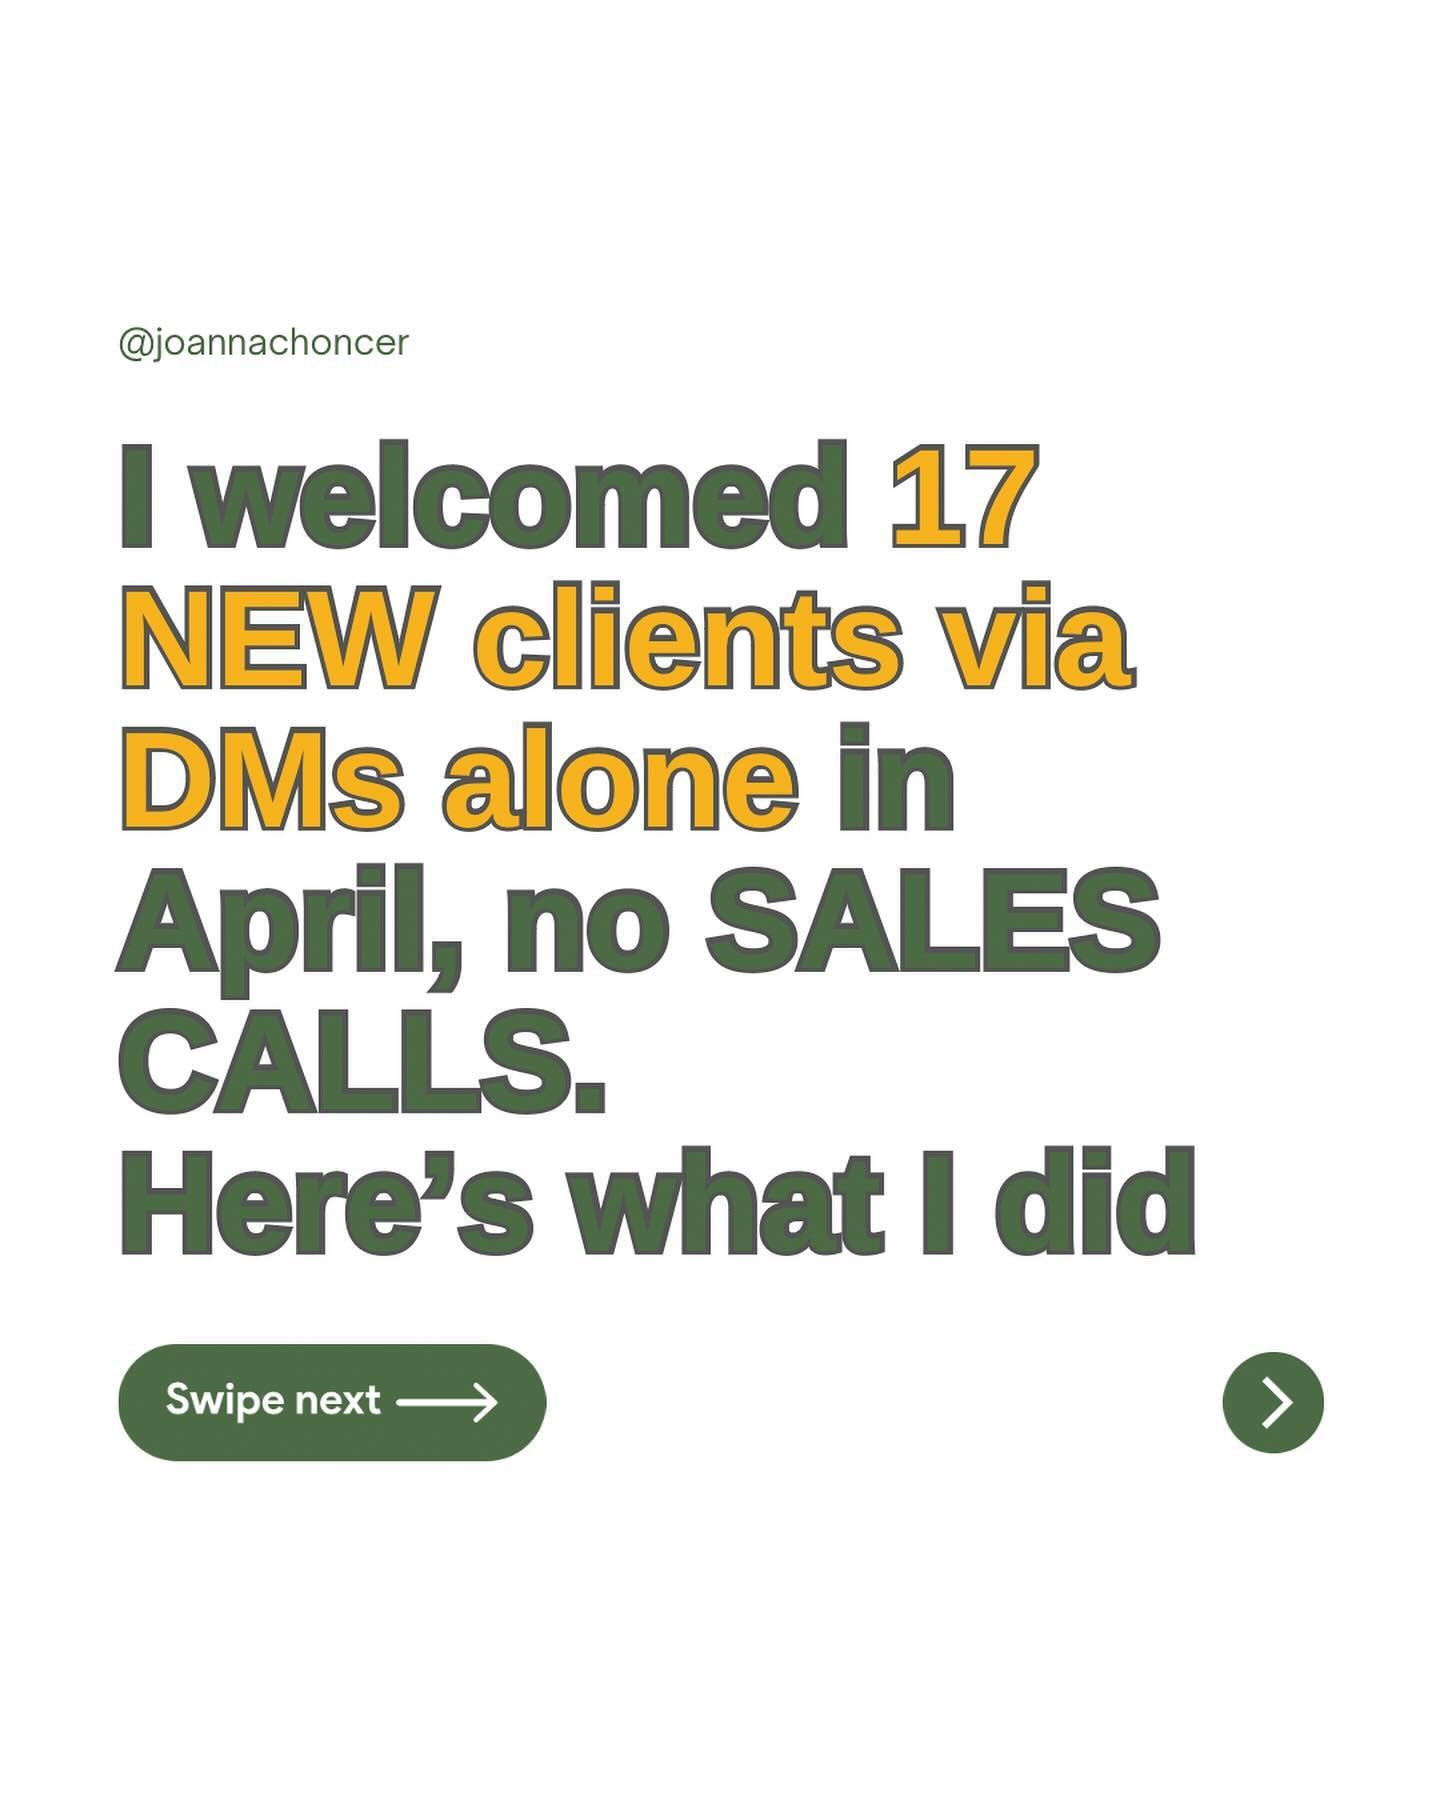 Following this step by step daily got me 17 NEW clients totally effortlessly because the convos were flowing easily (by asking the right type of questions &amp; reflecting in the right way).

I didn&rsquo;t spend a second convincing anyone or overcom